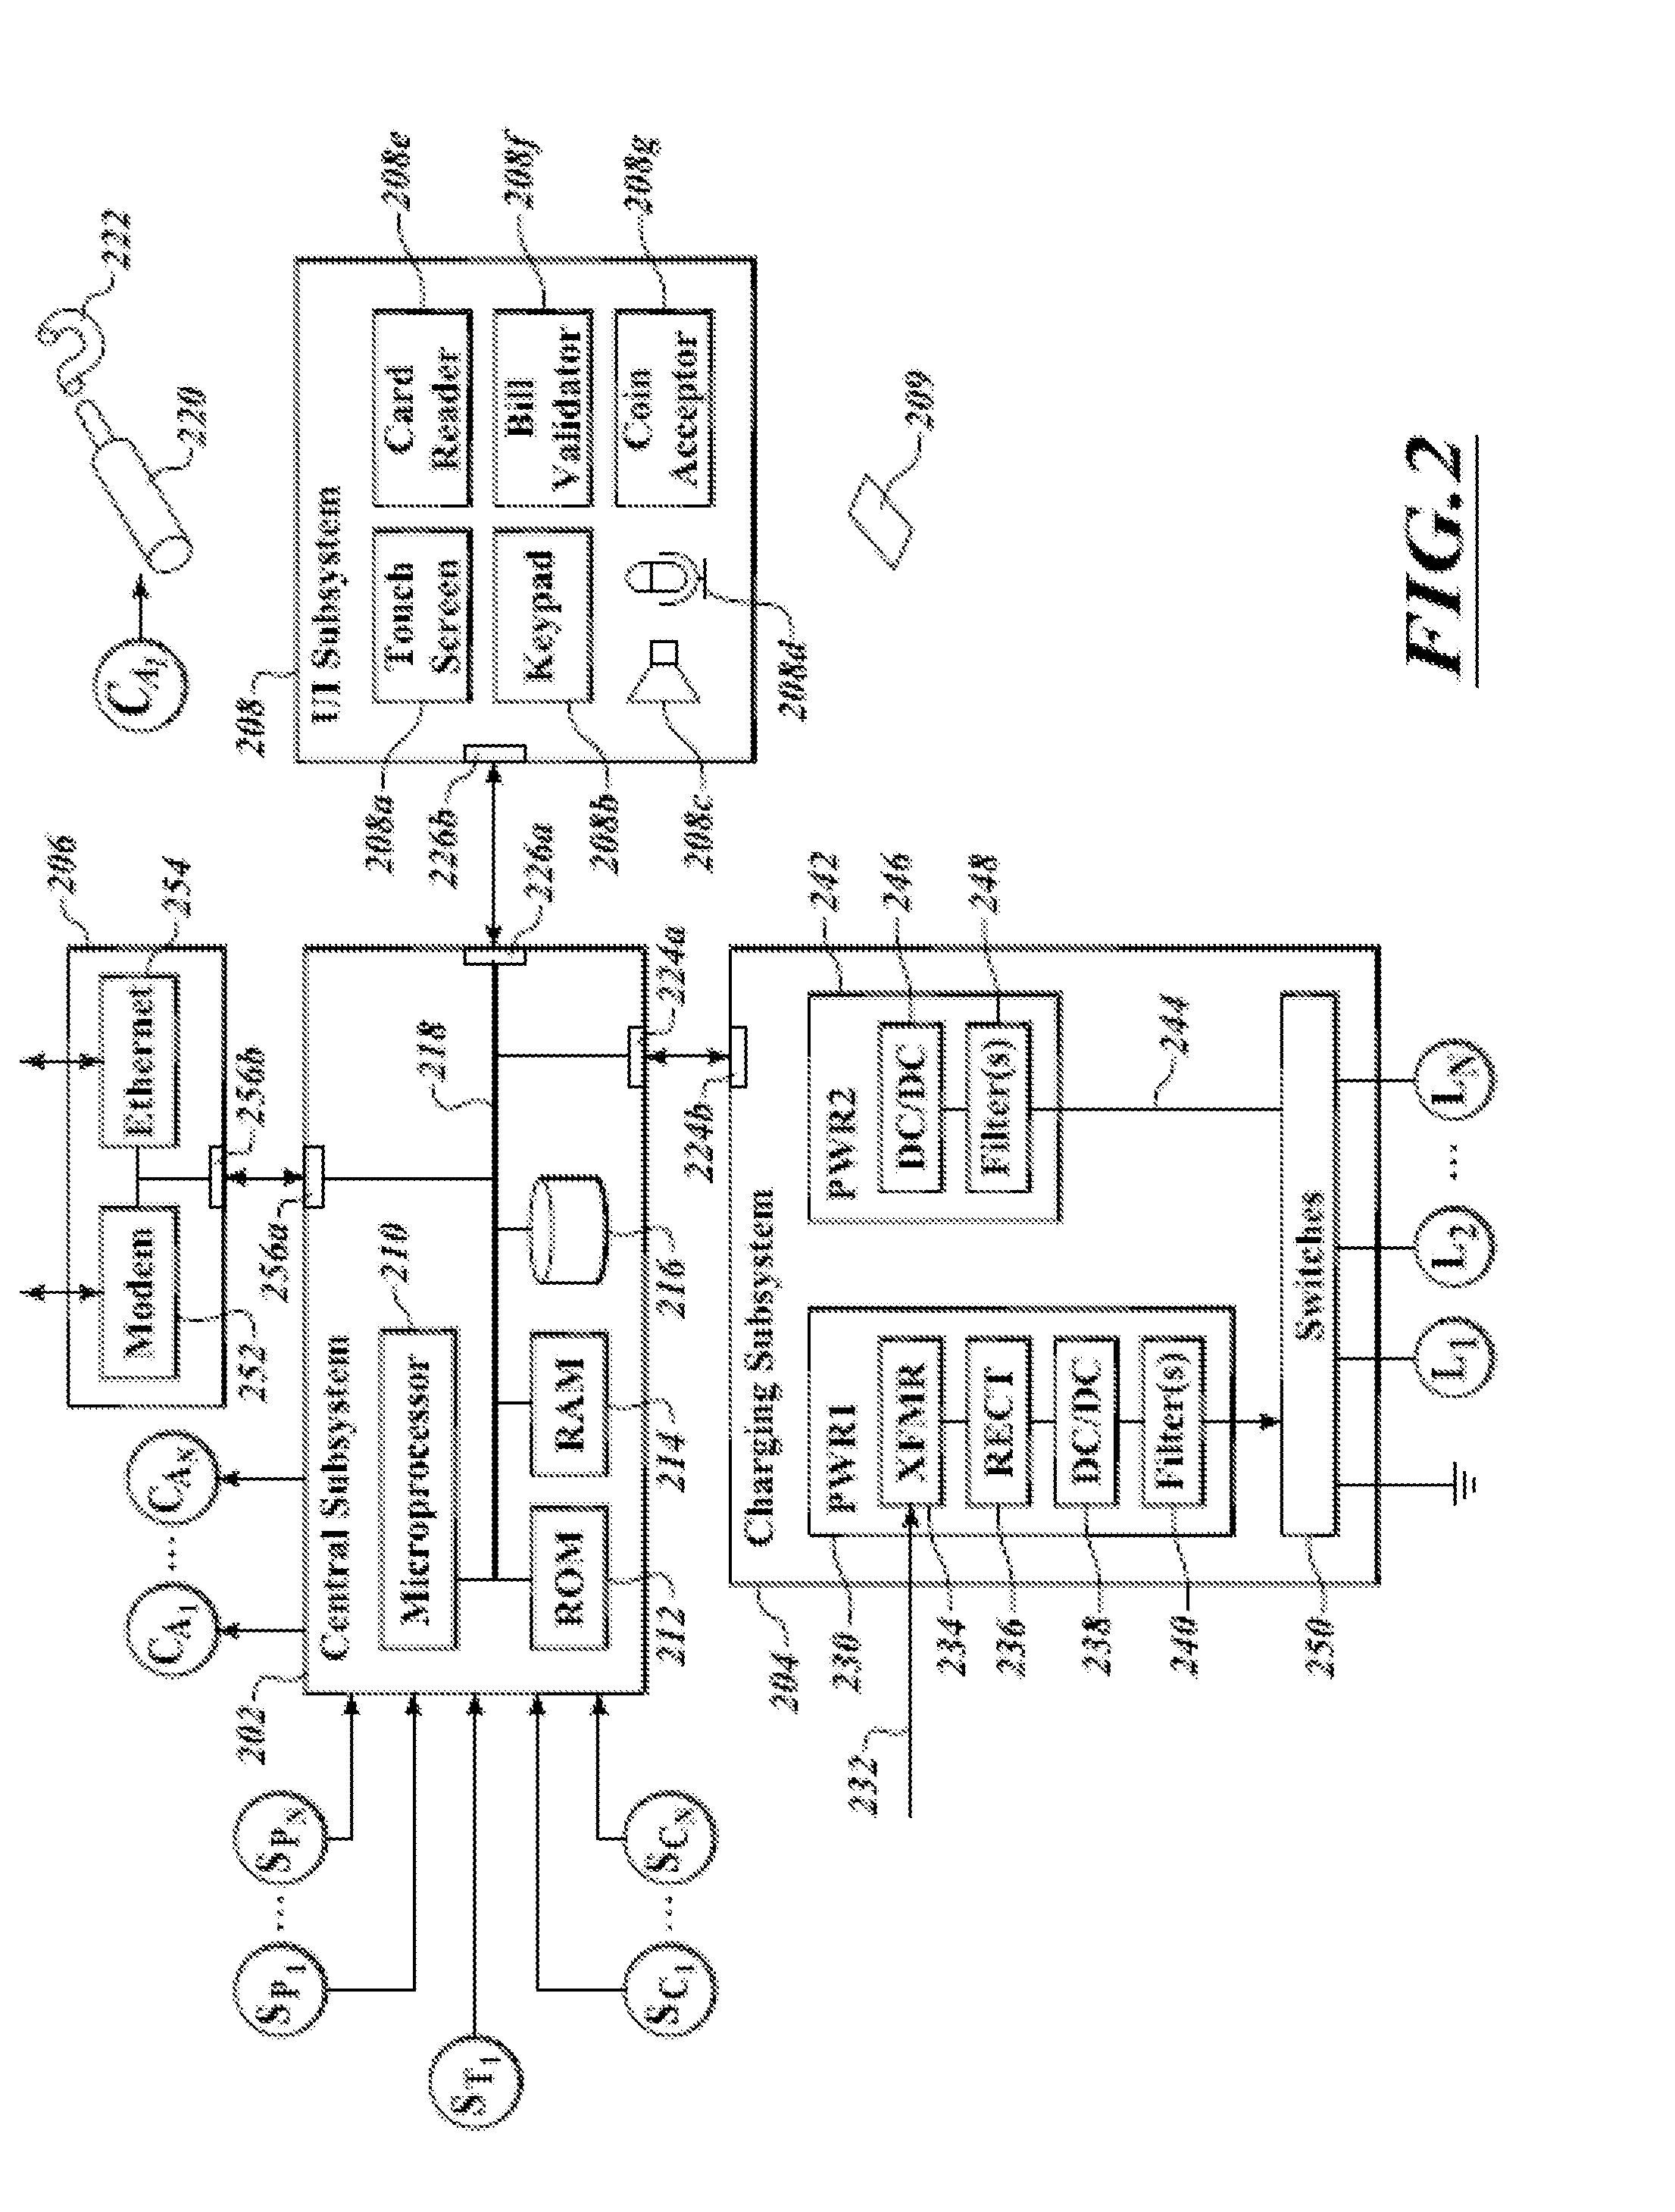 Apparatus, method and article for providing vehicle event data